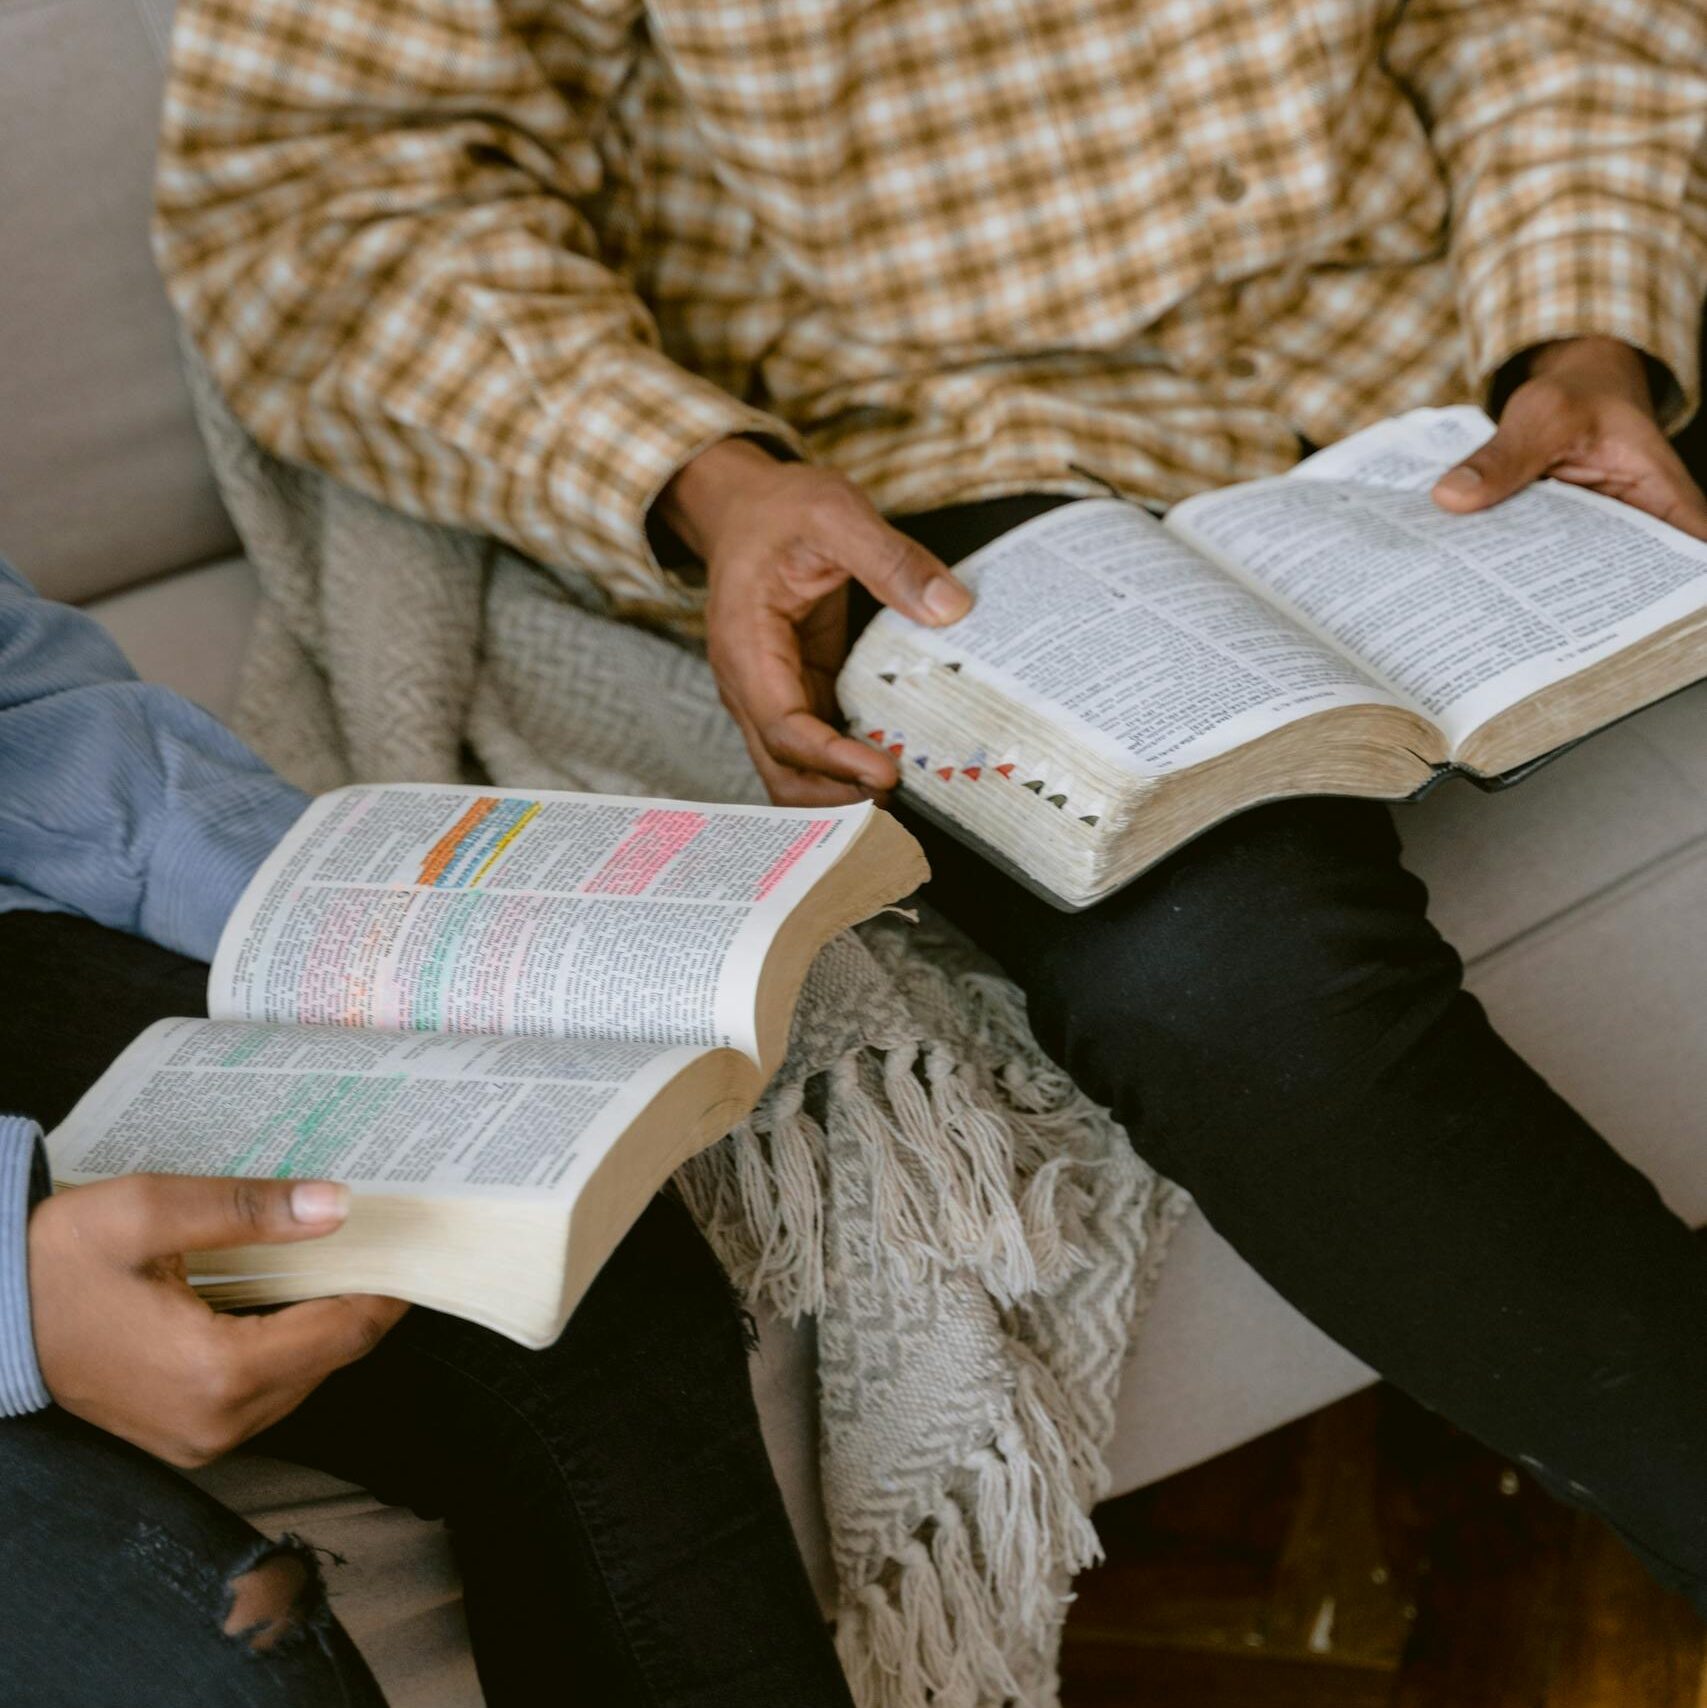 Two People Reading Bible while Sitting on a Sofa